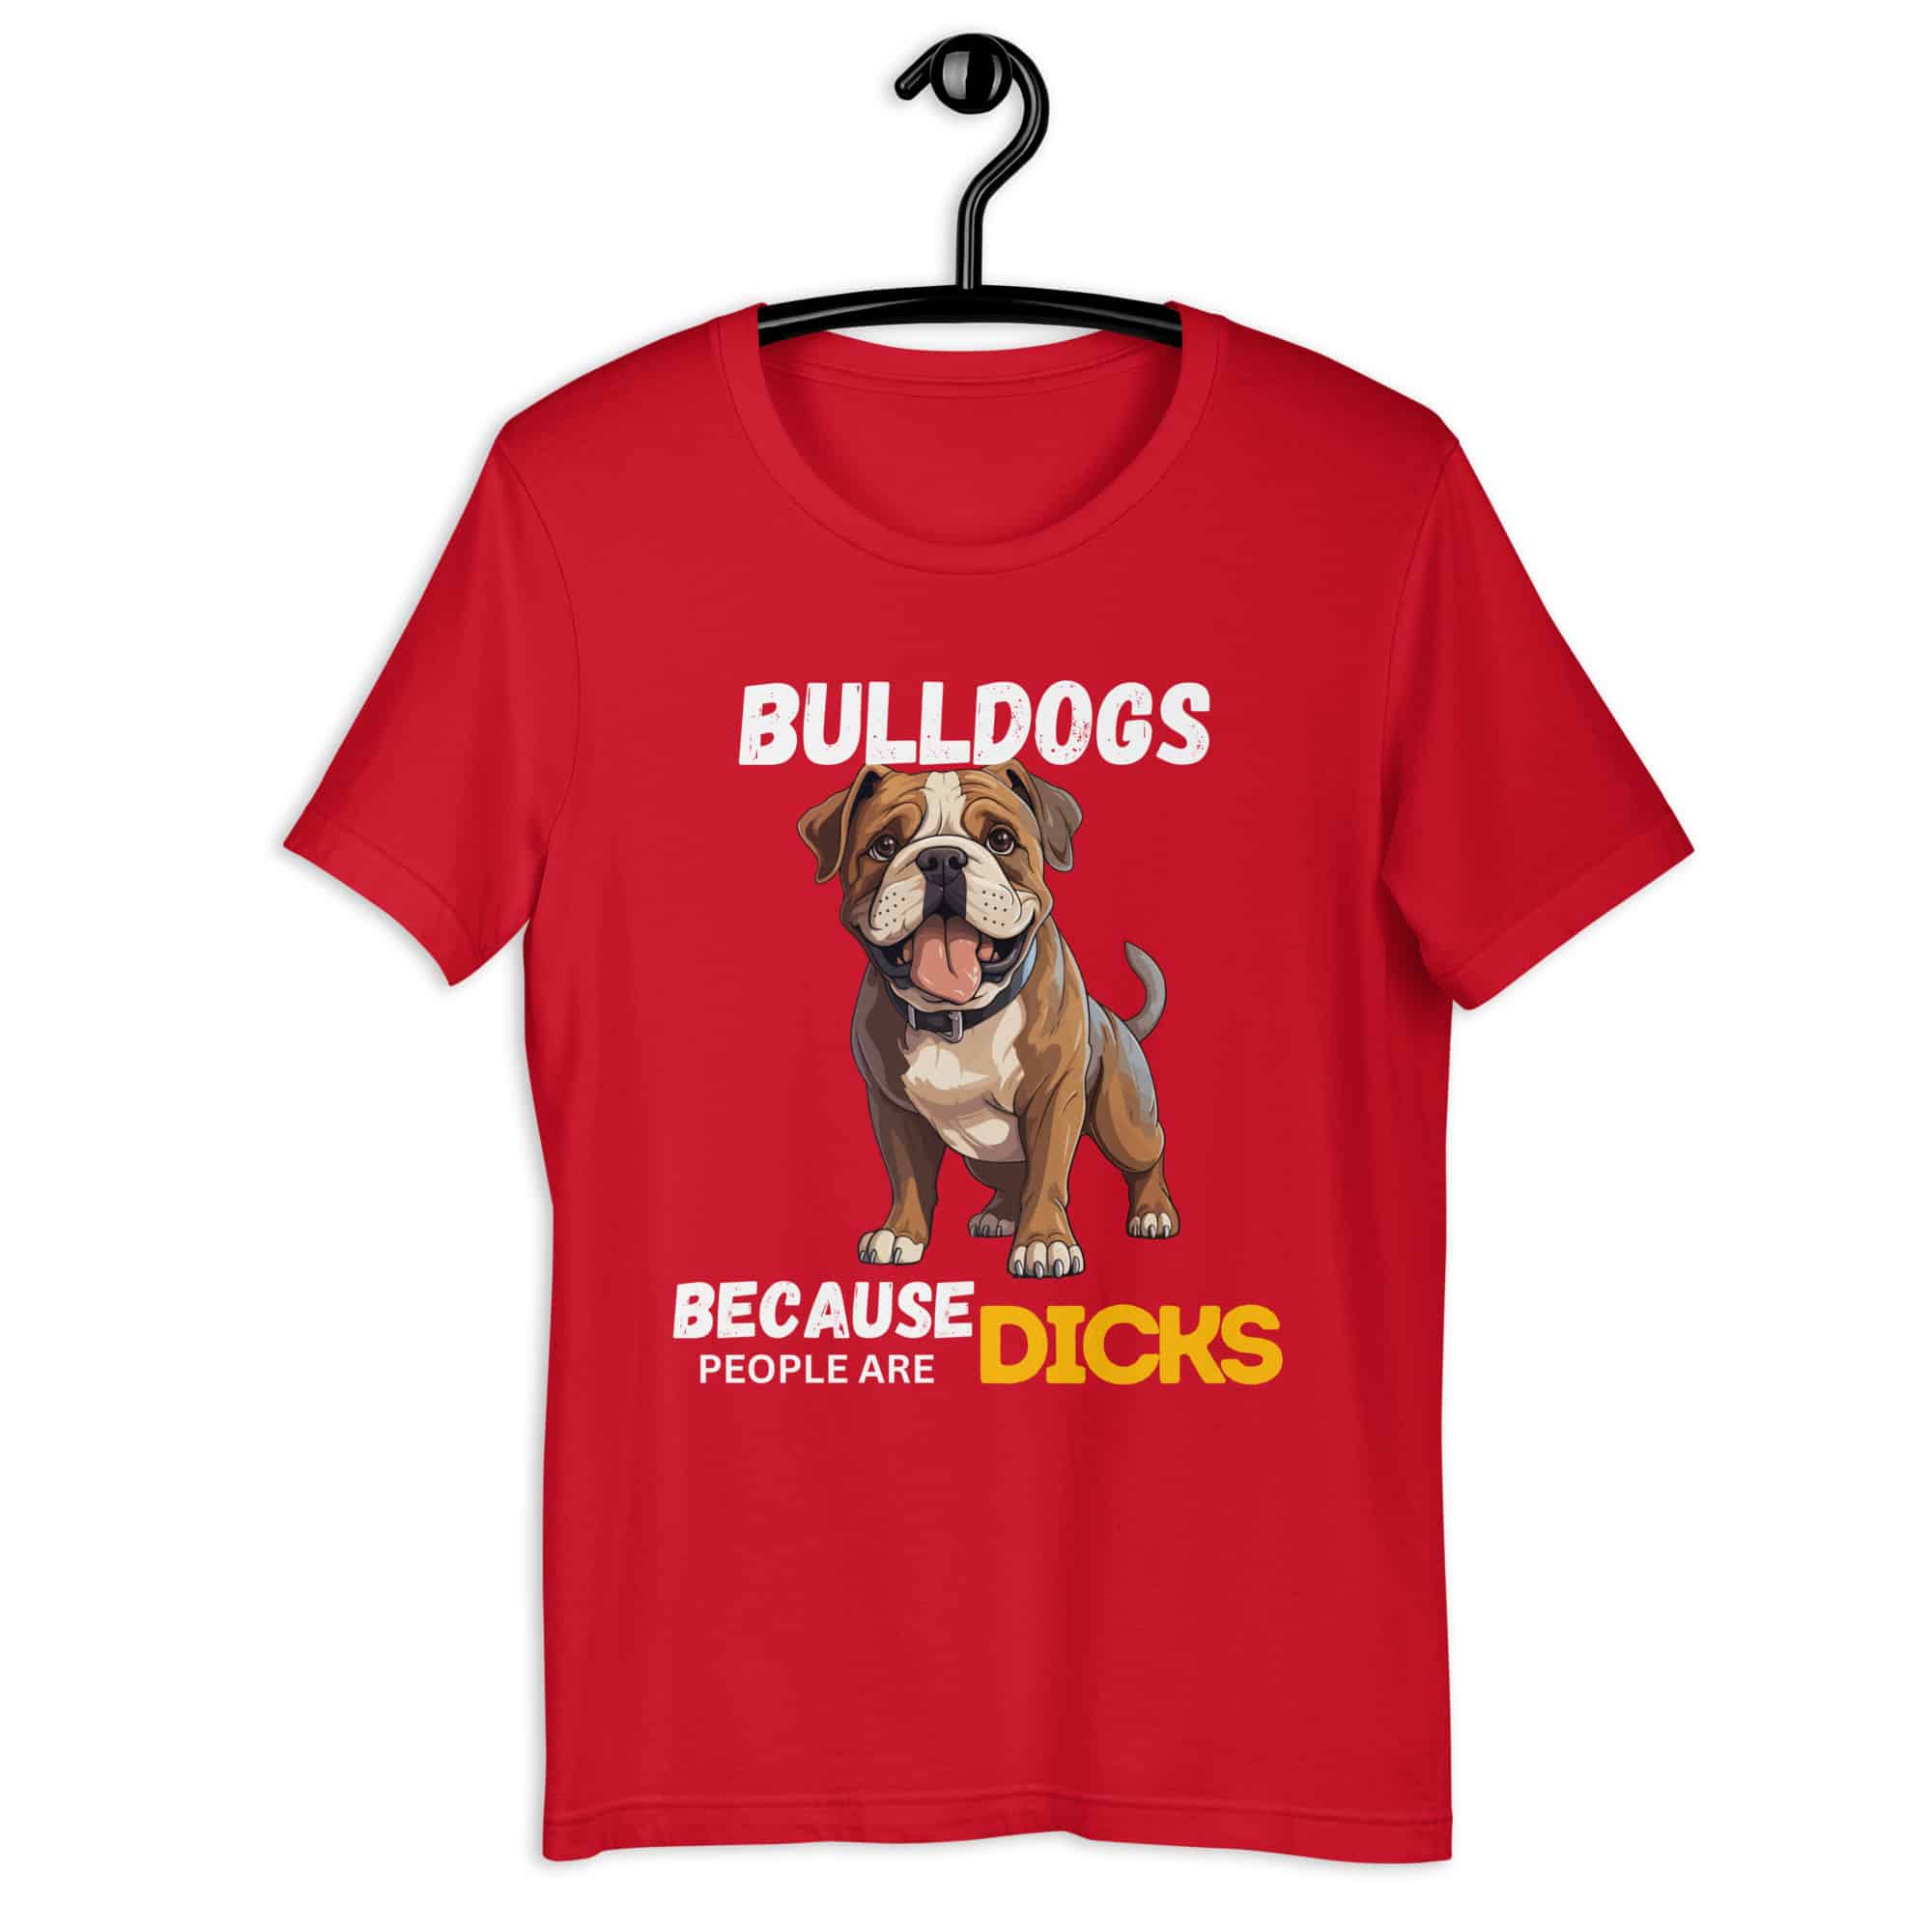 Bulldogs Because People Are Dicks Unisex T-Shirt Red